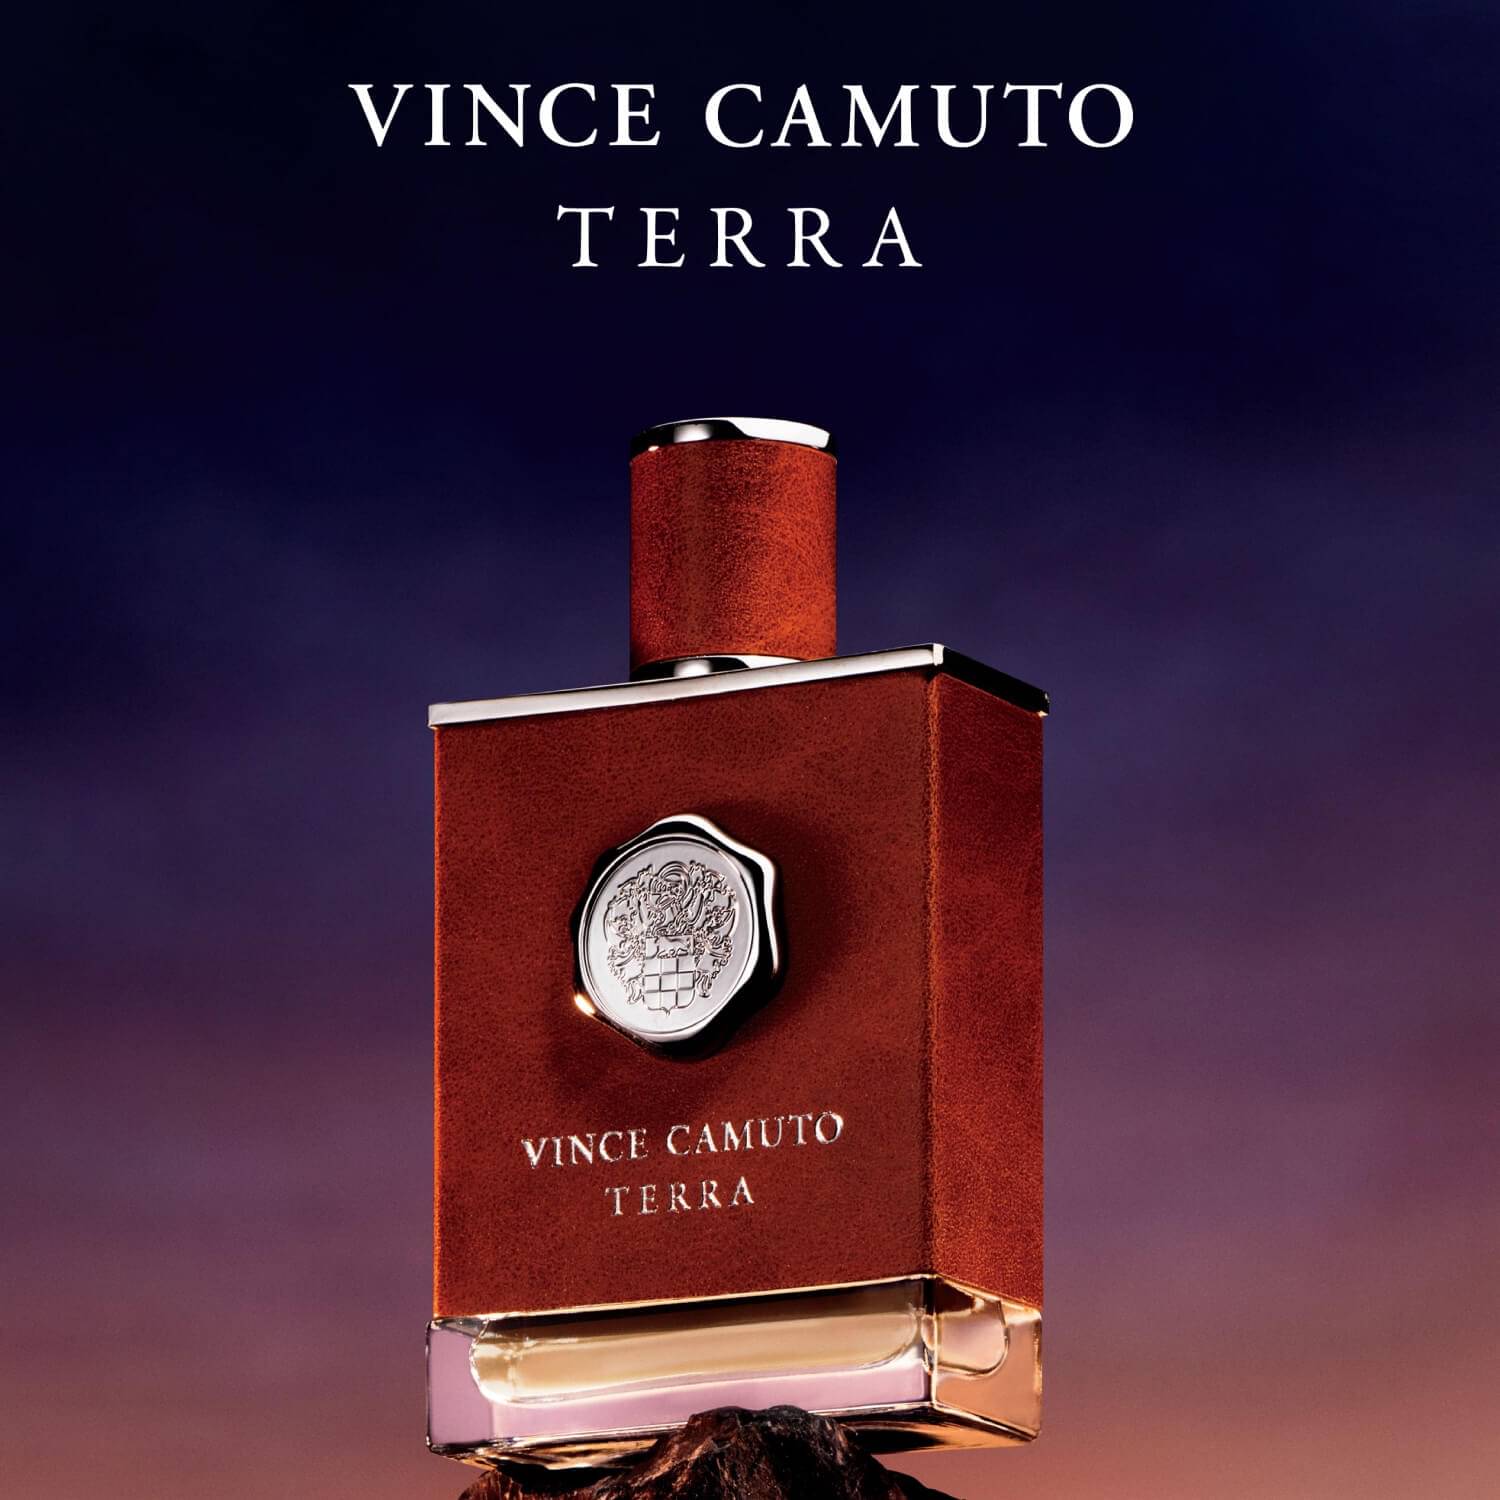 Vince Camuto - Discover Vince Camuto Terra – this fresh, woody